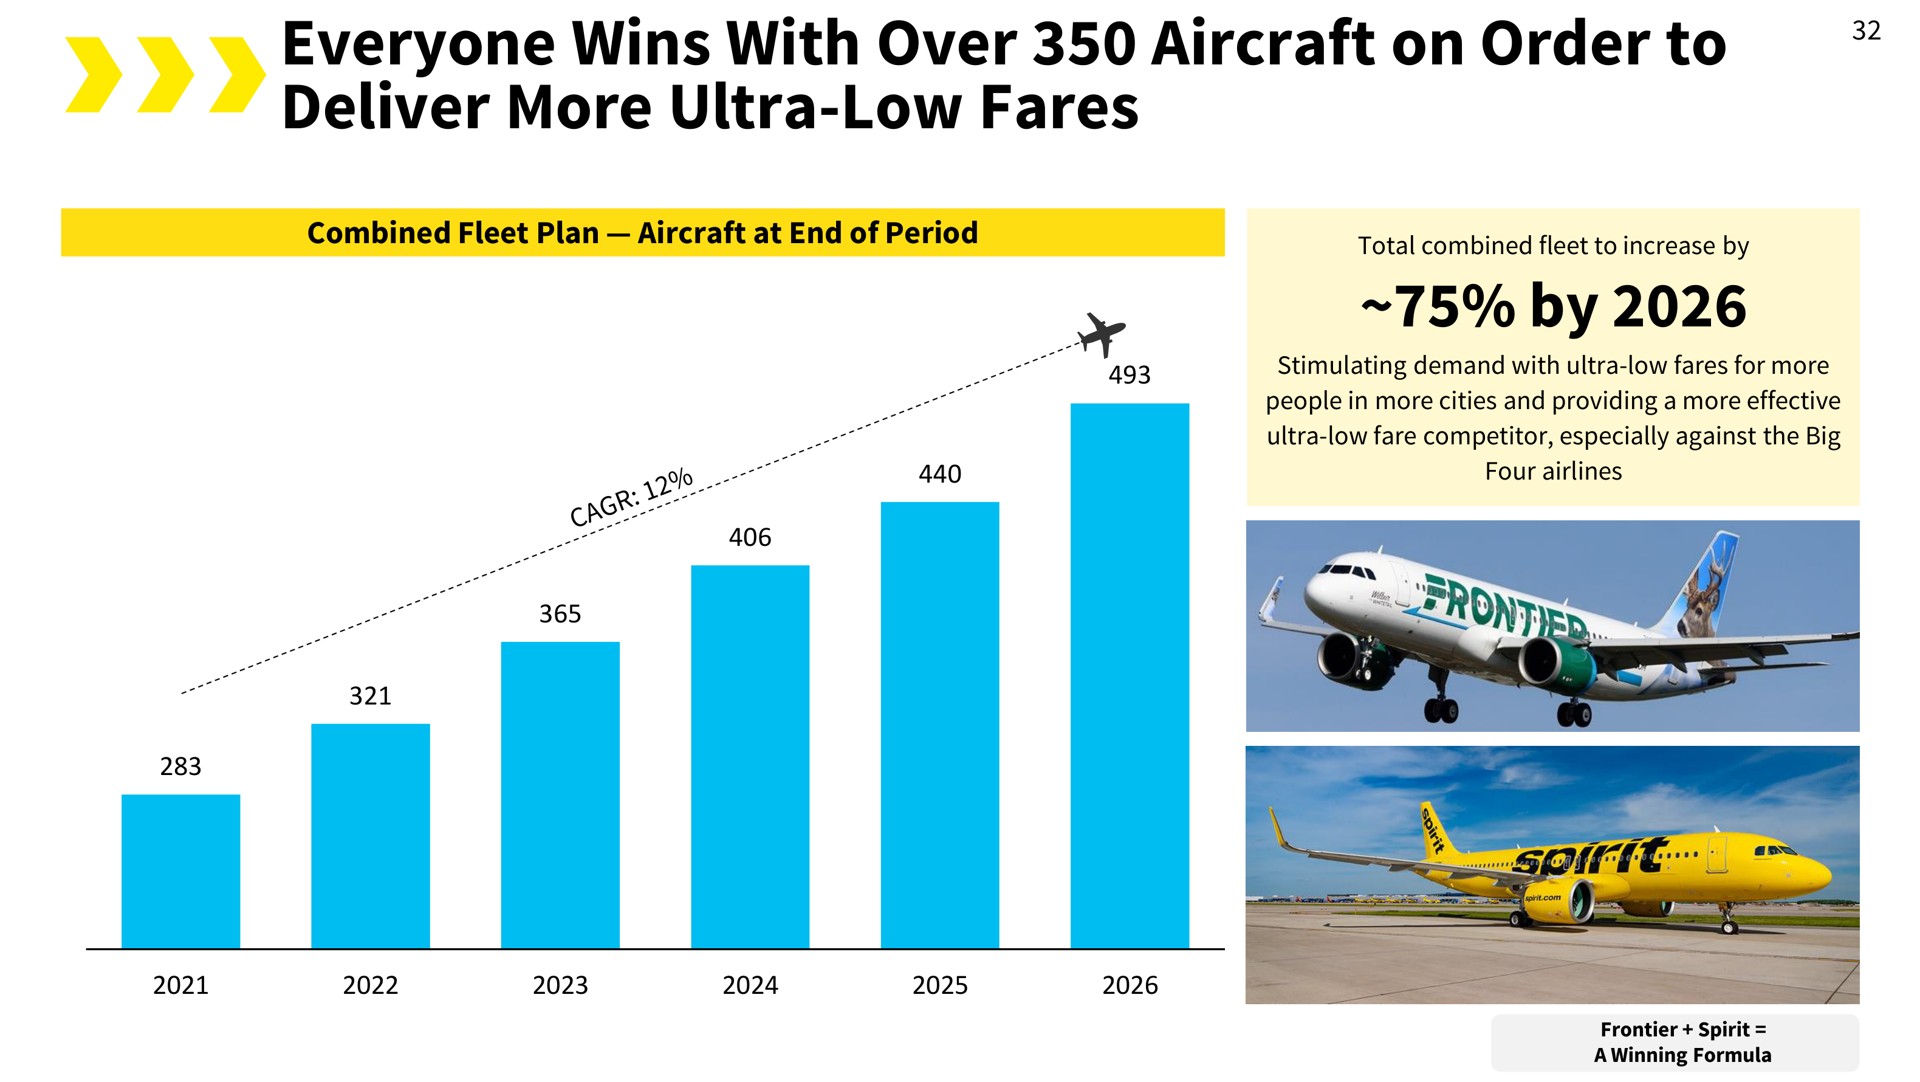 everyone wins with over aircraft on order to deliver more ultra low fares by | Spirit